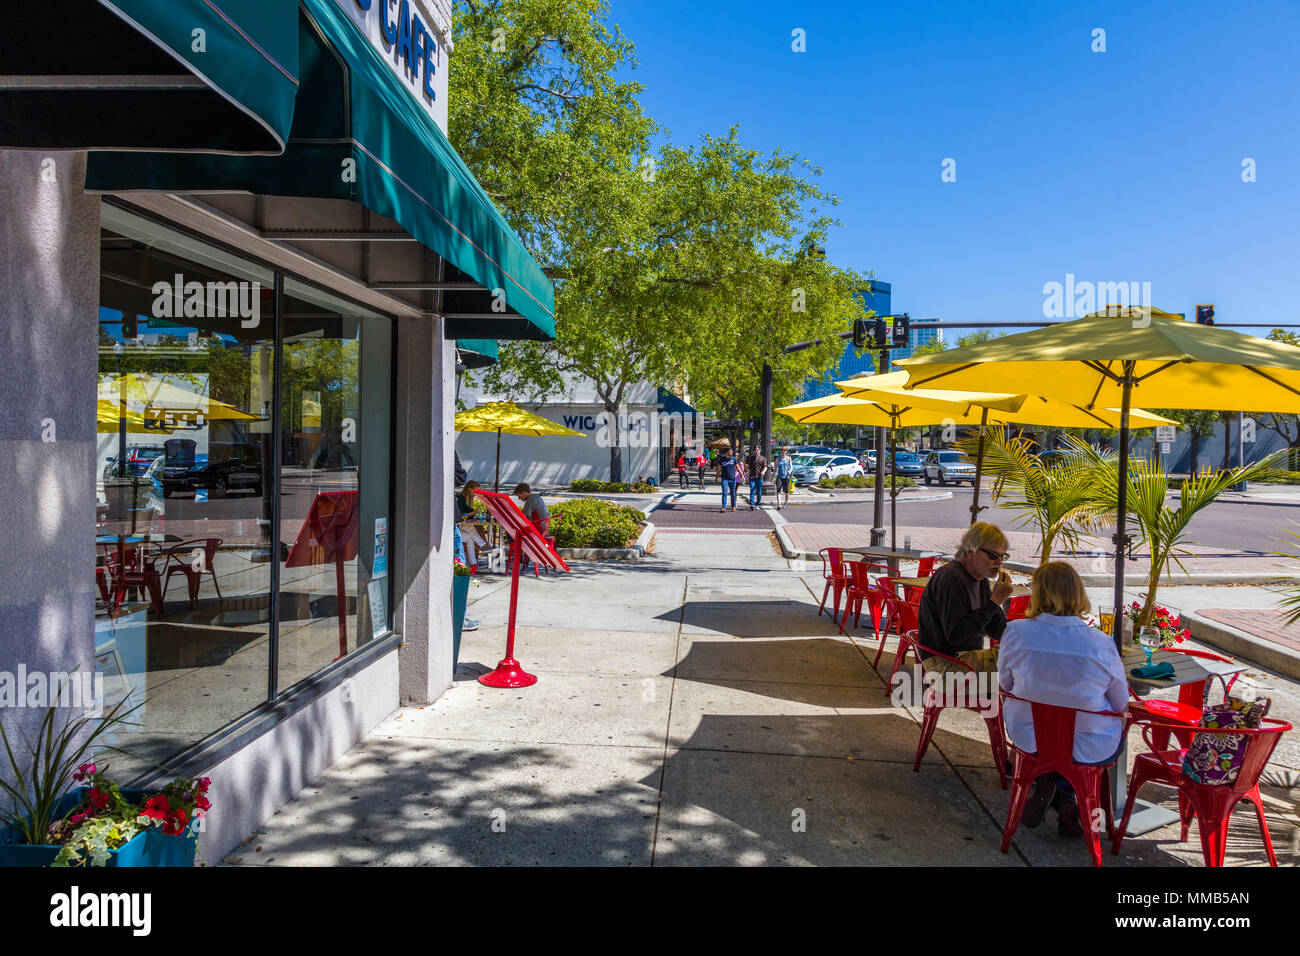 Outdoor restaurant cafe on street in Central arts District of St Petersburg FLorida in the United States Stock Photo